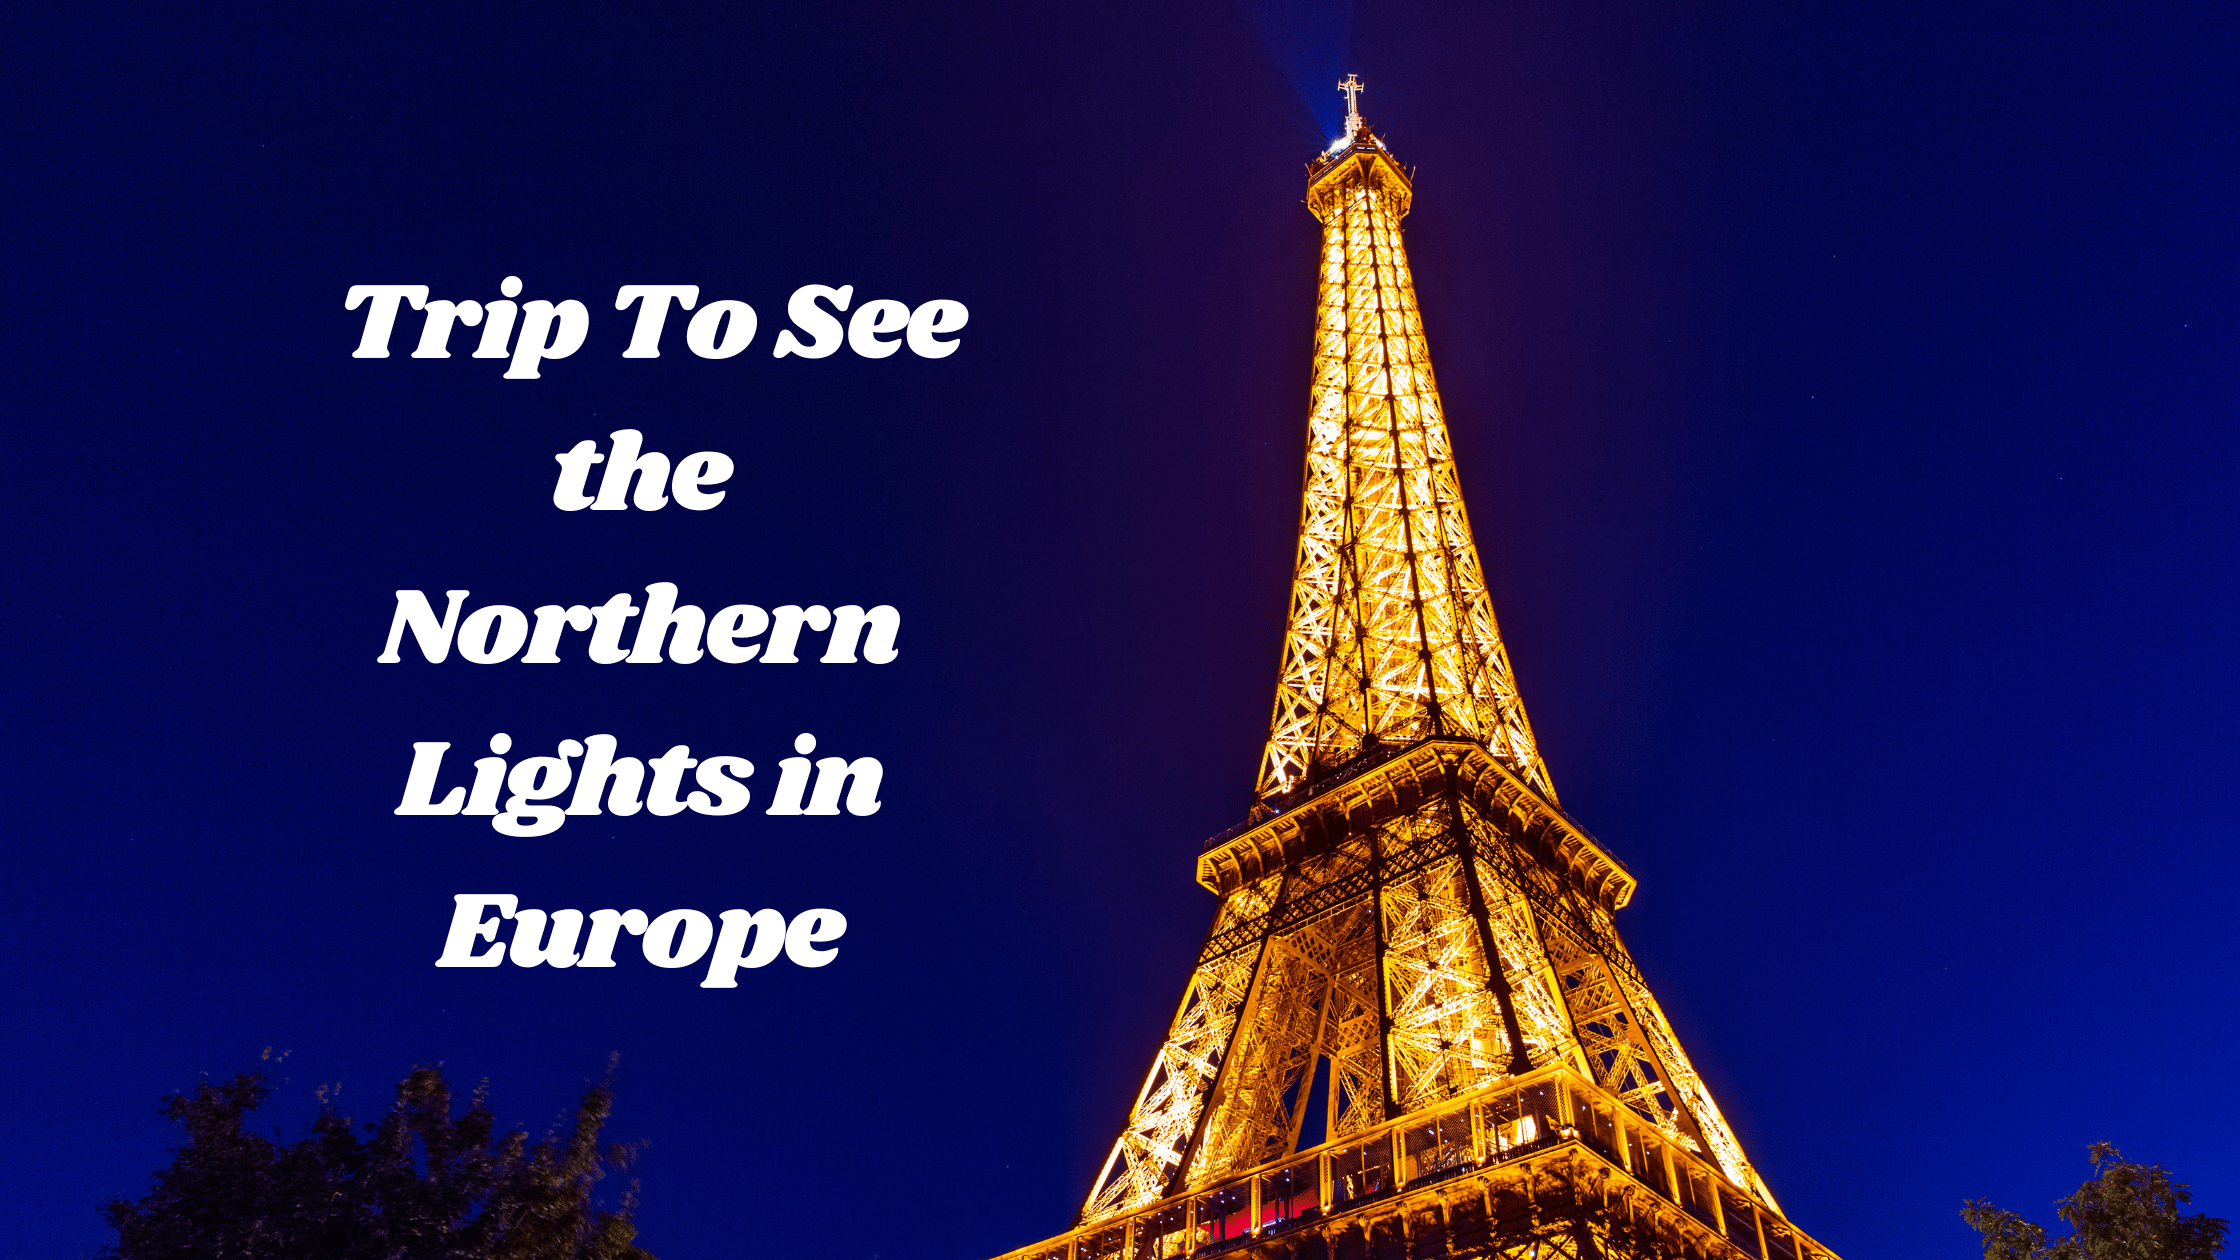 Planning a Trip To See the Northern Lights in Europe